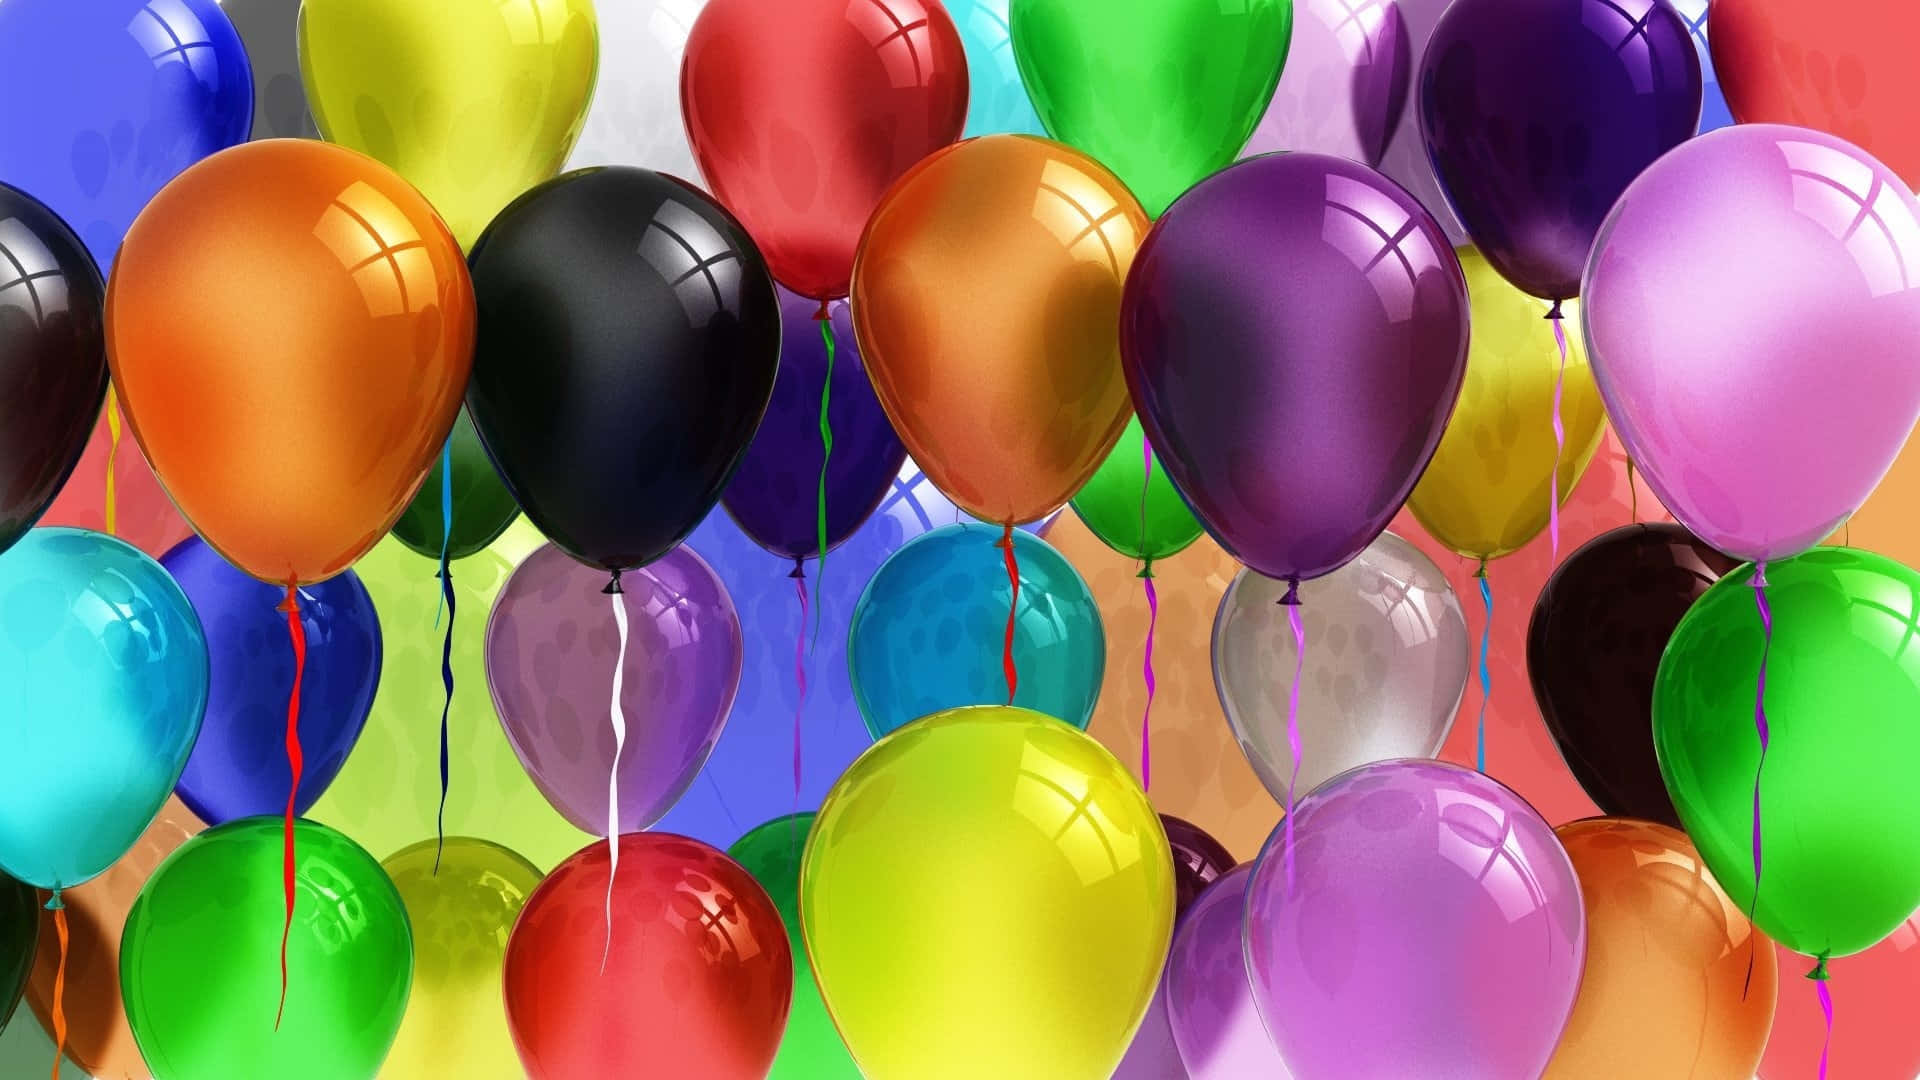 Digital Balloons Picture